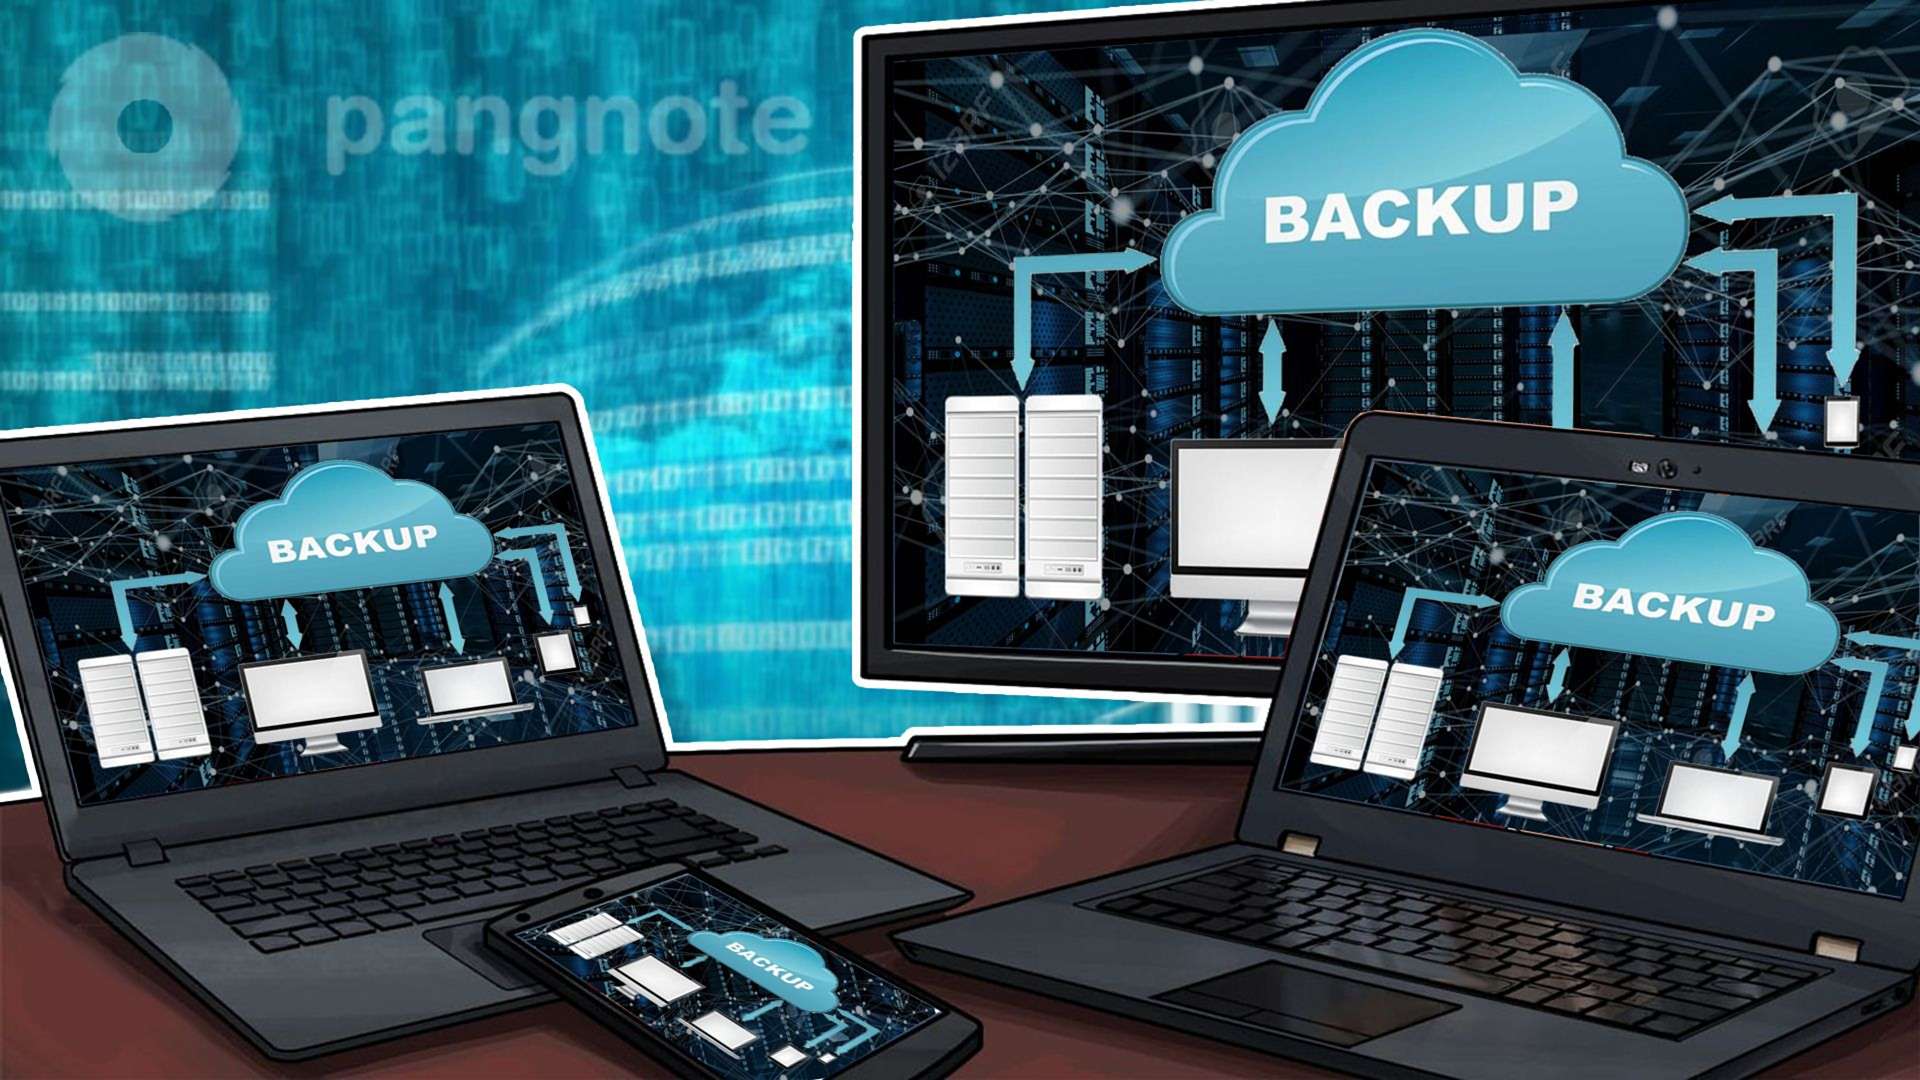 Backup technologies that are used on the server